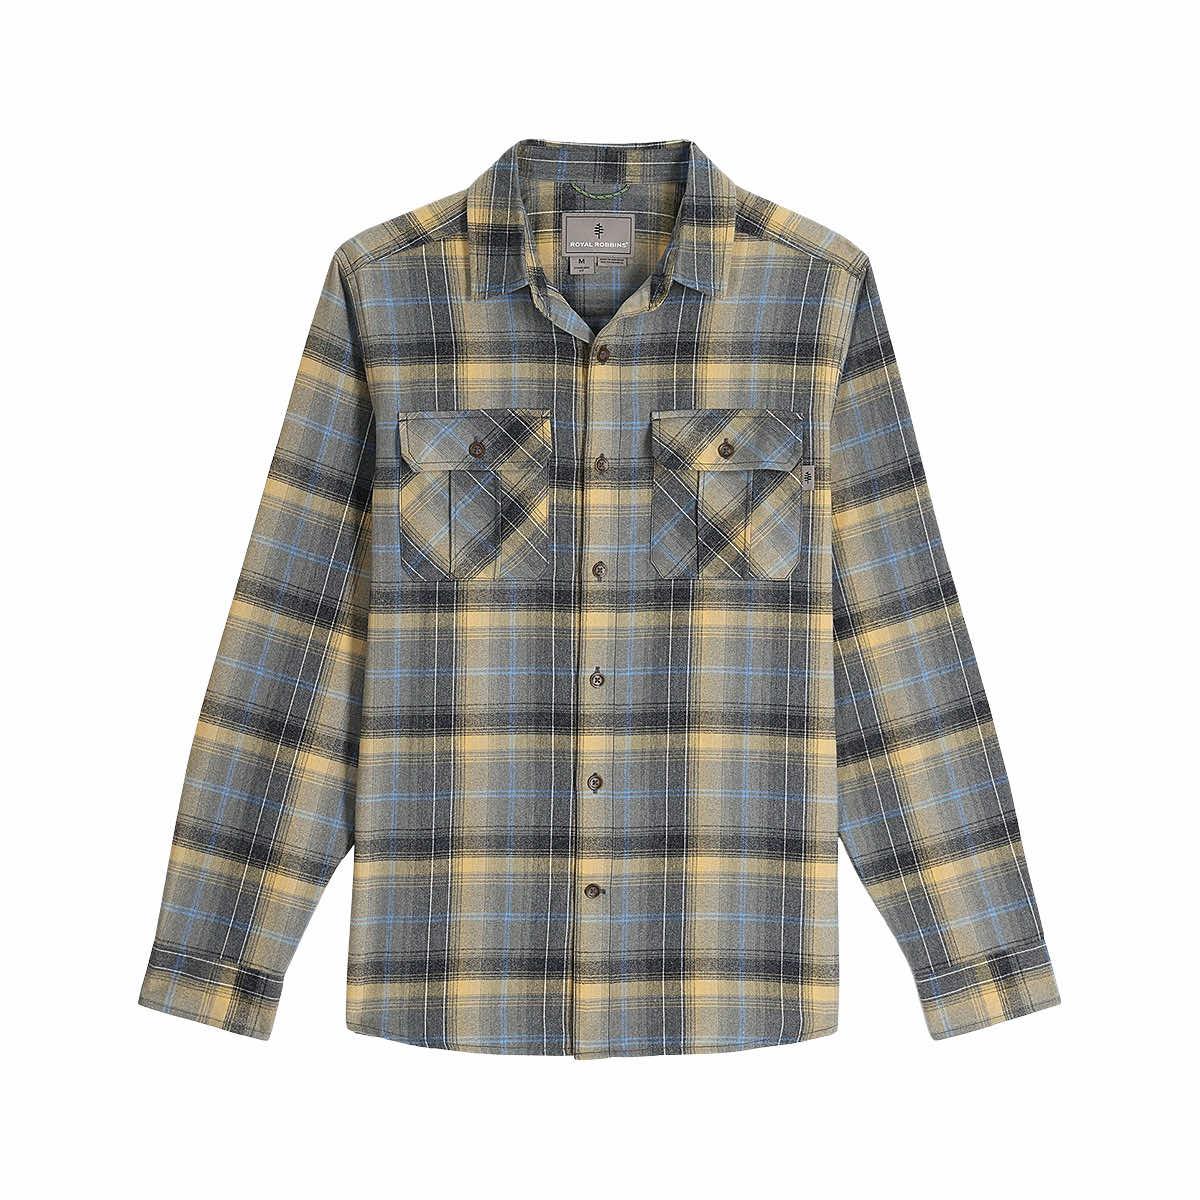 Smartwool Summit County Quilted Shirt Jacket - Men's - Clothing